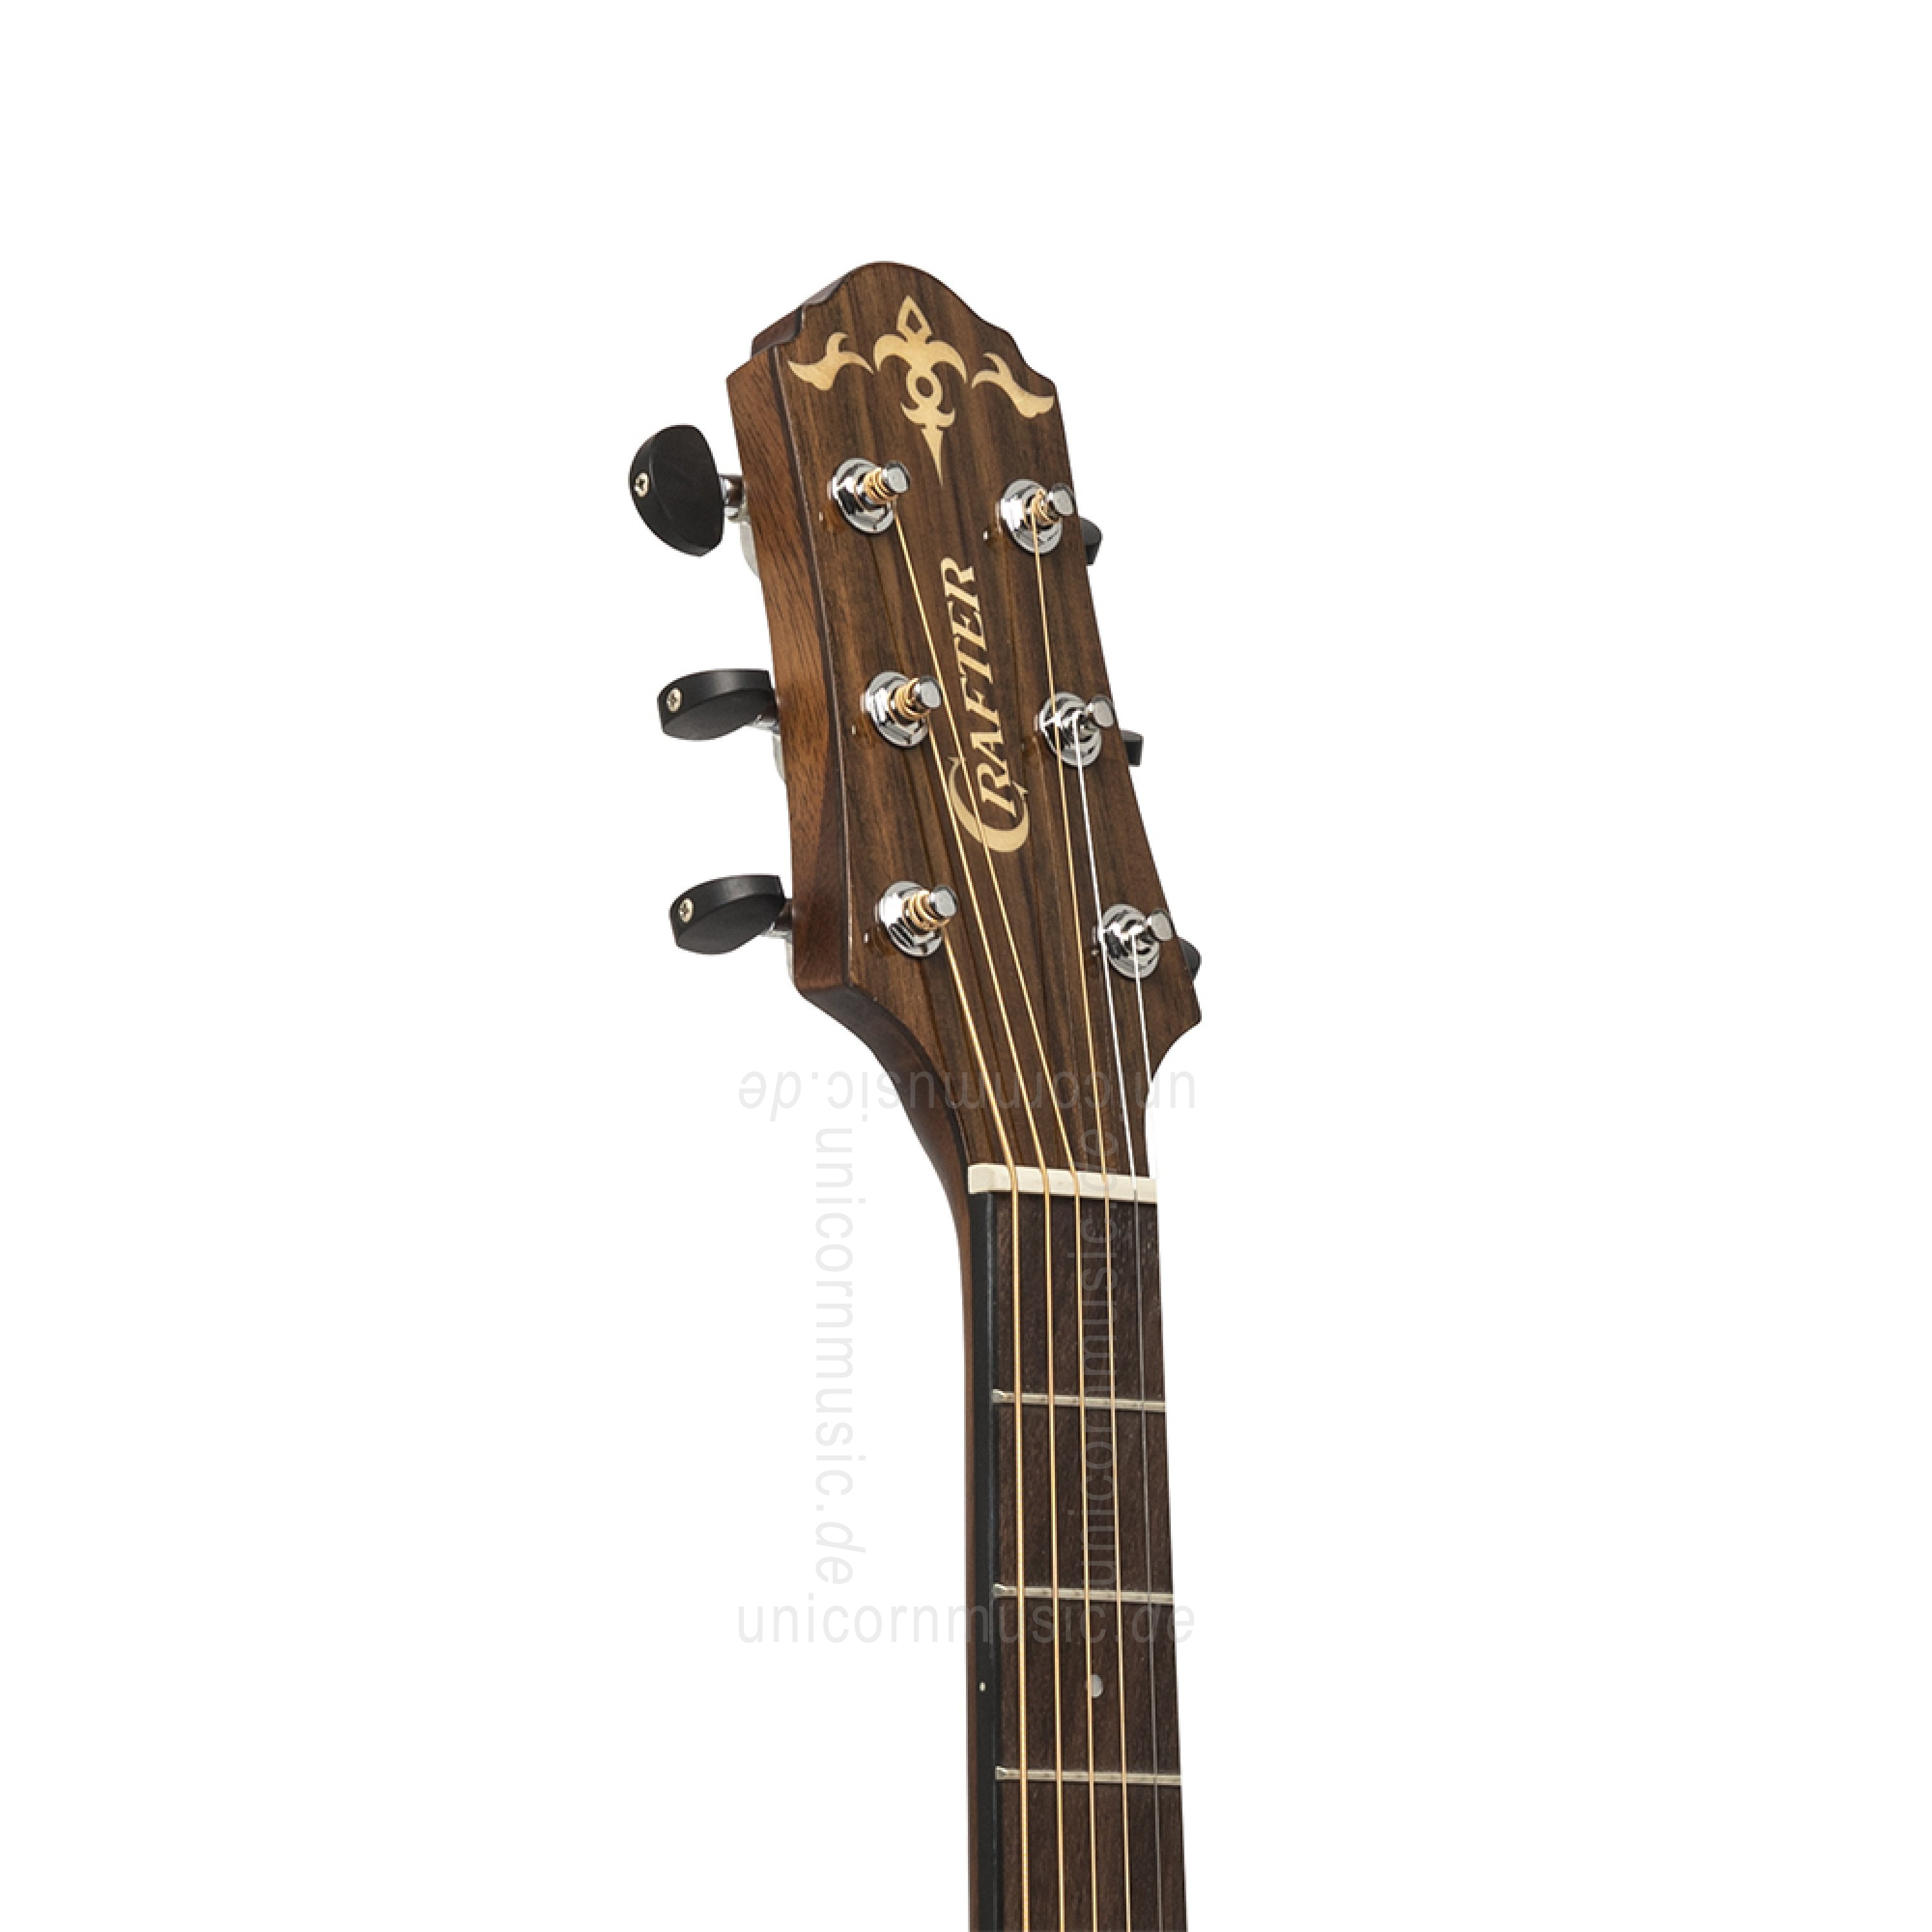 to article description / price Acoustic Guitar - CRAFTER Able D600 N - Dreadnought - solid spruce top